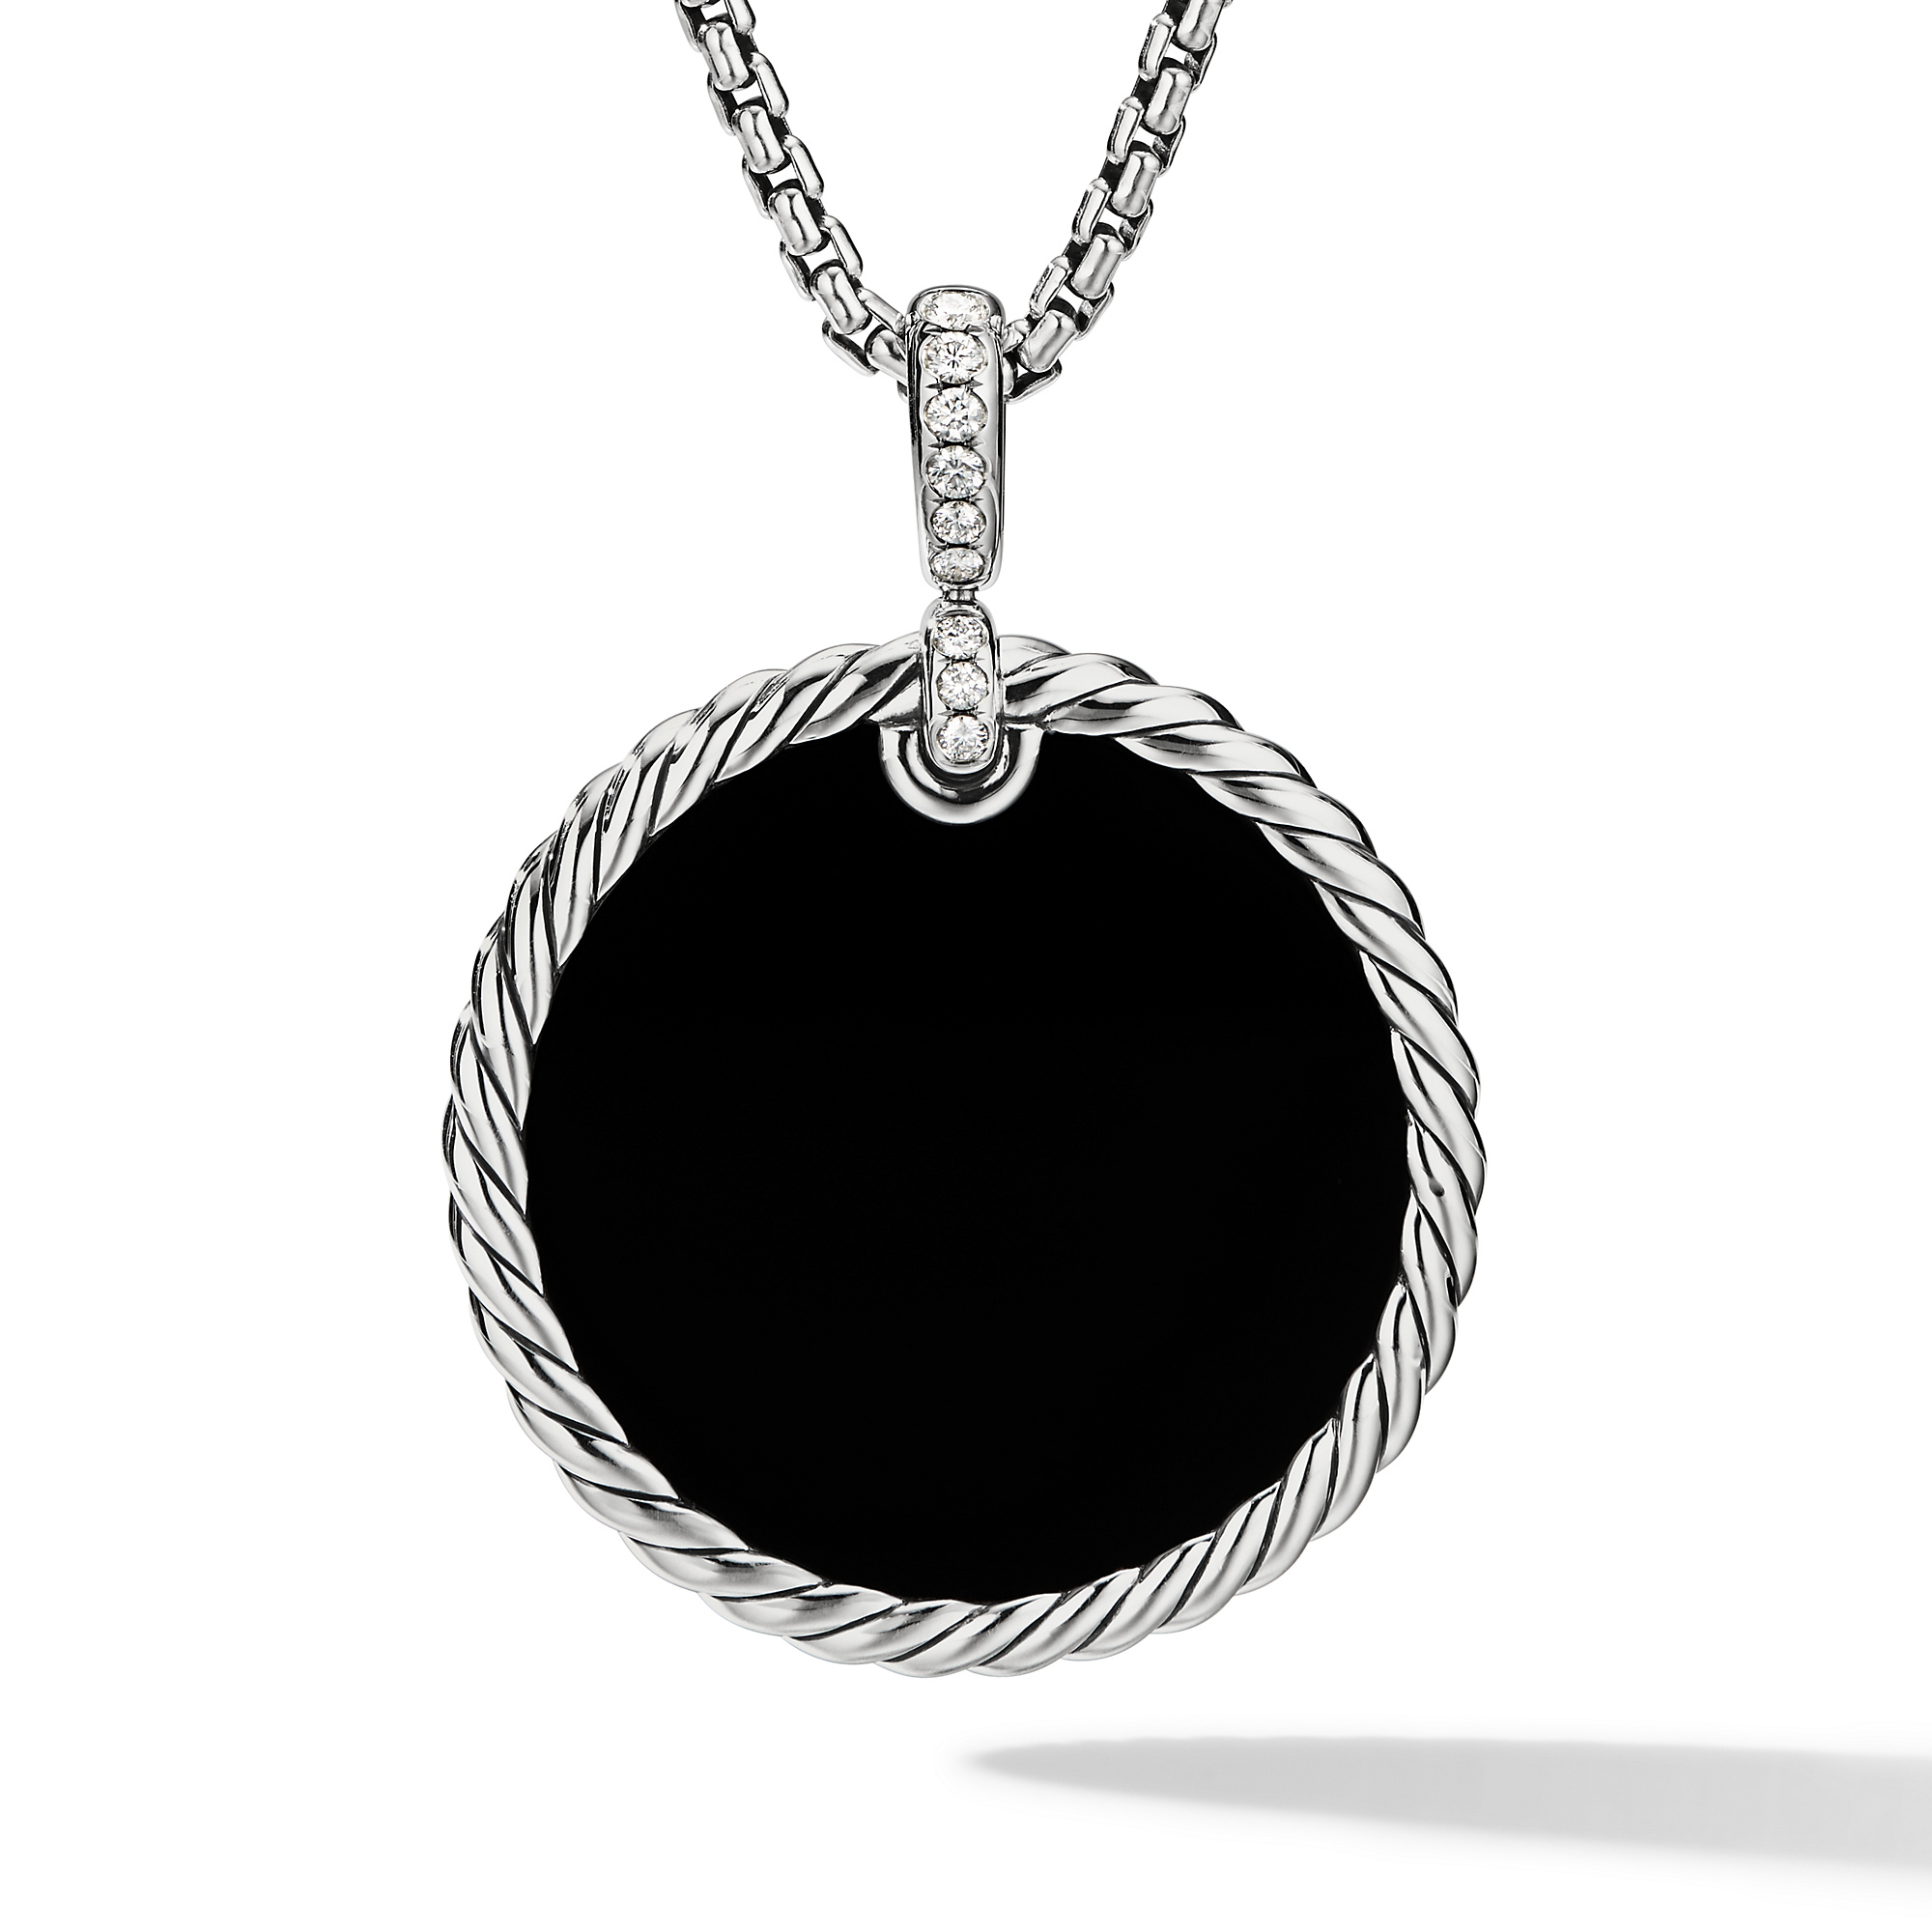 DY Elements® Reversible Disc Pendant in Sterling Silver with Black Onyx Reversible to Mother of Pearl and Diamonds, 32mm